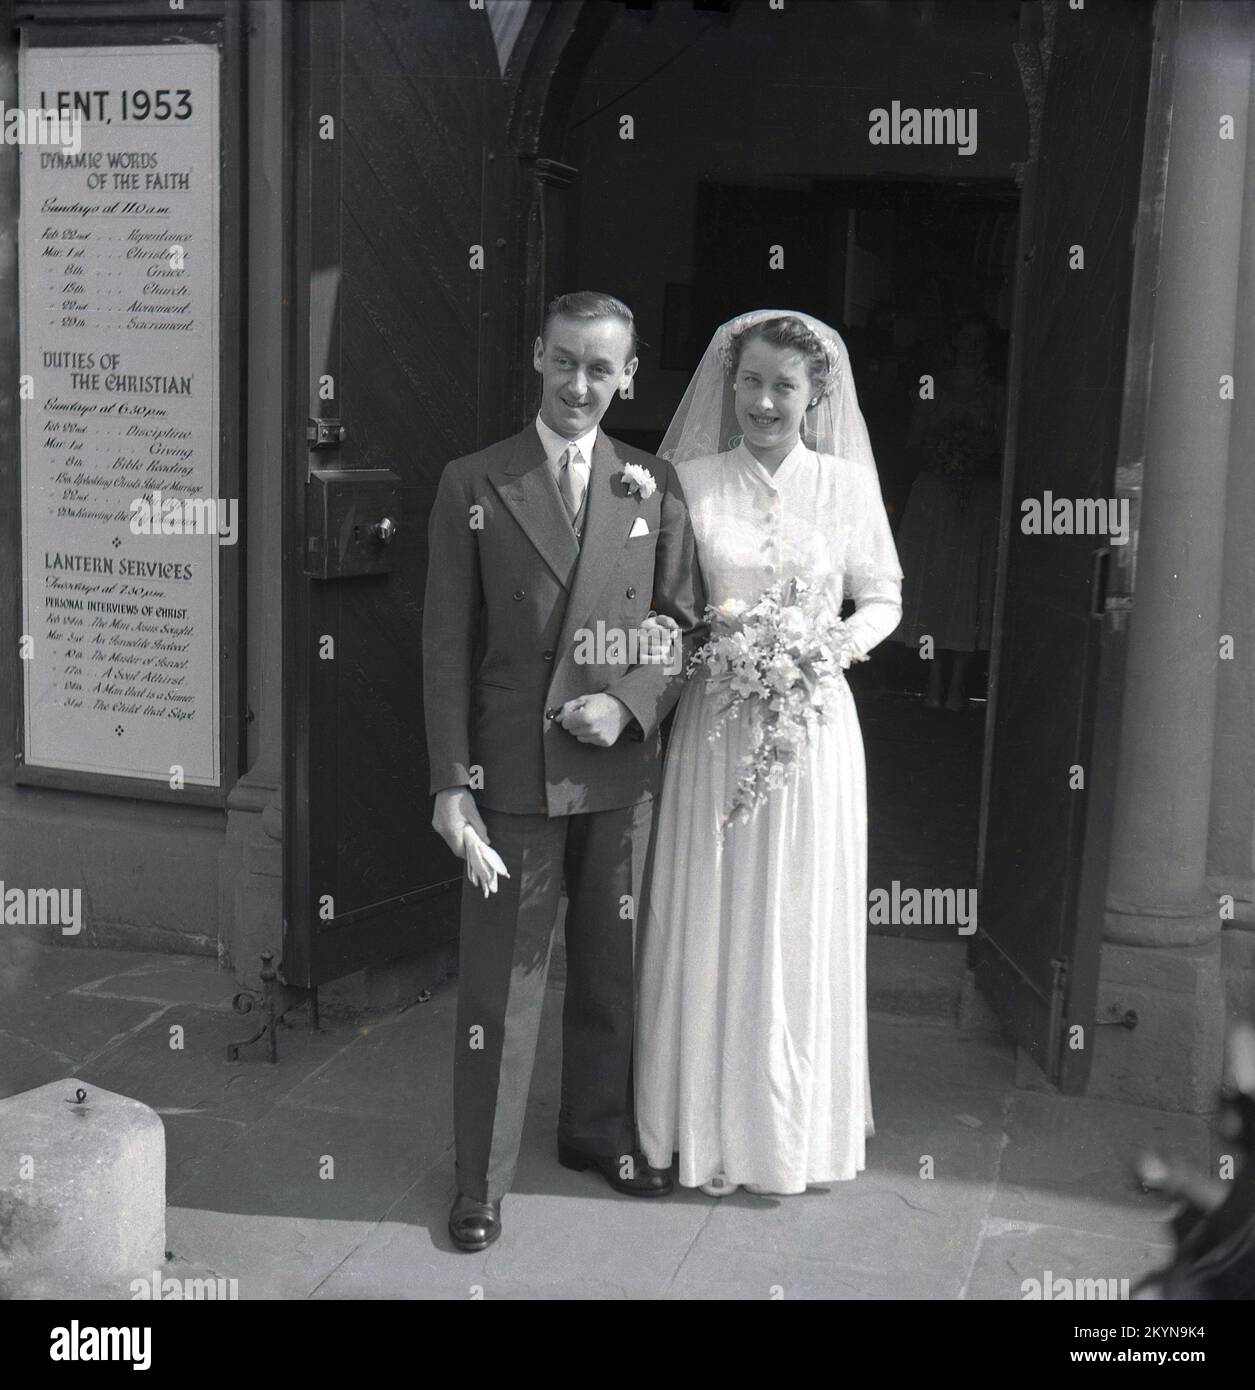 1953, historical, Lent and a newly married couple standing together ...